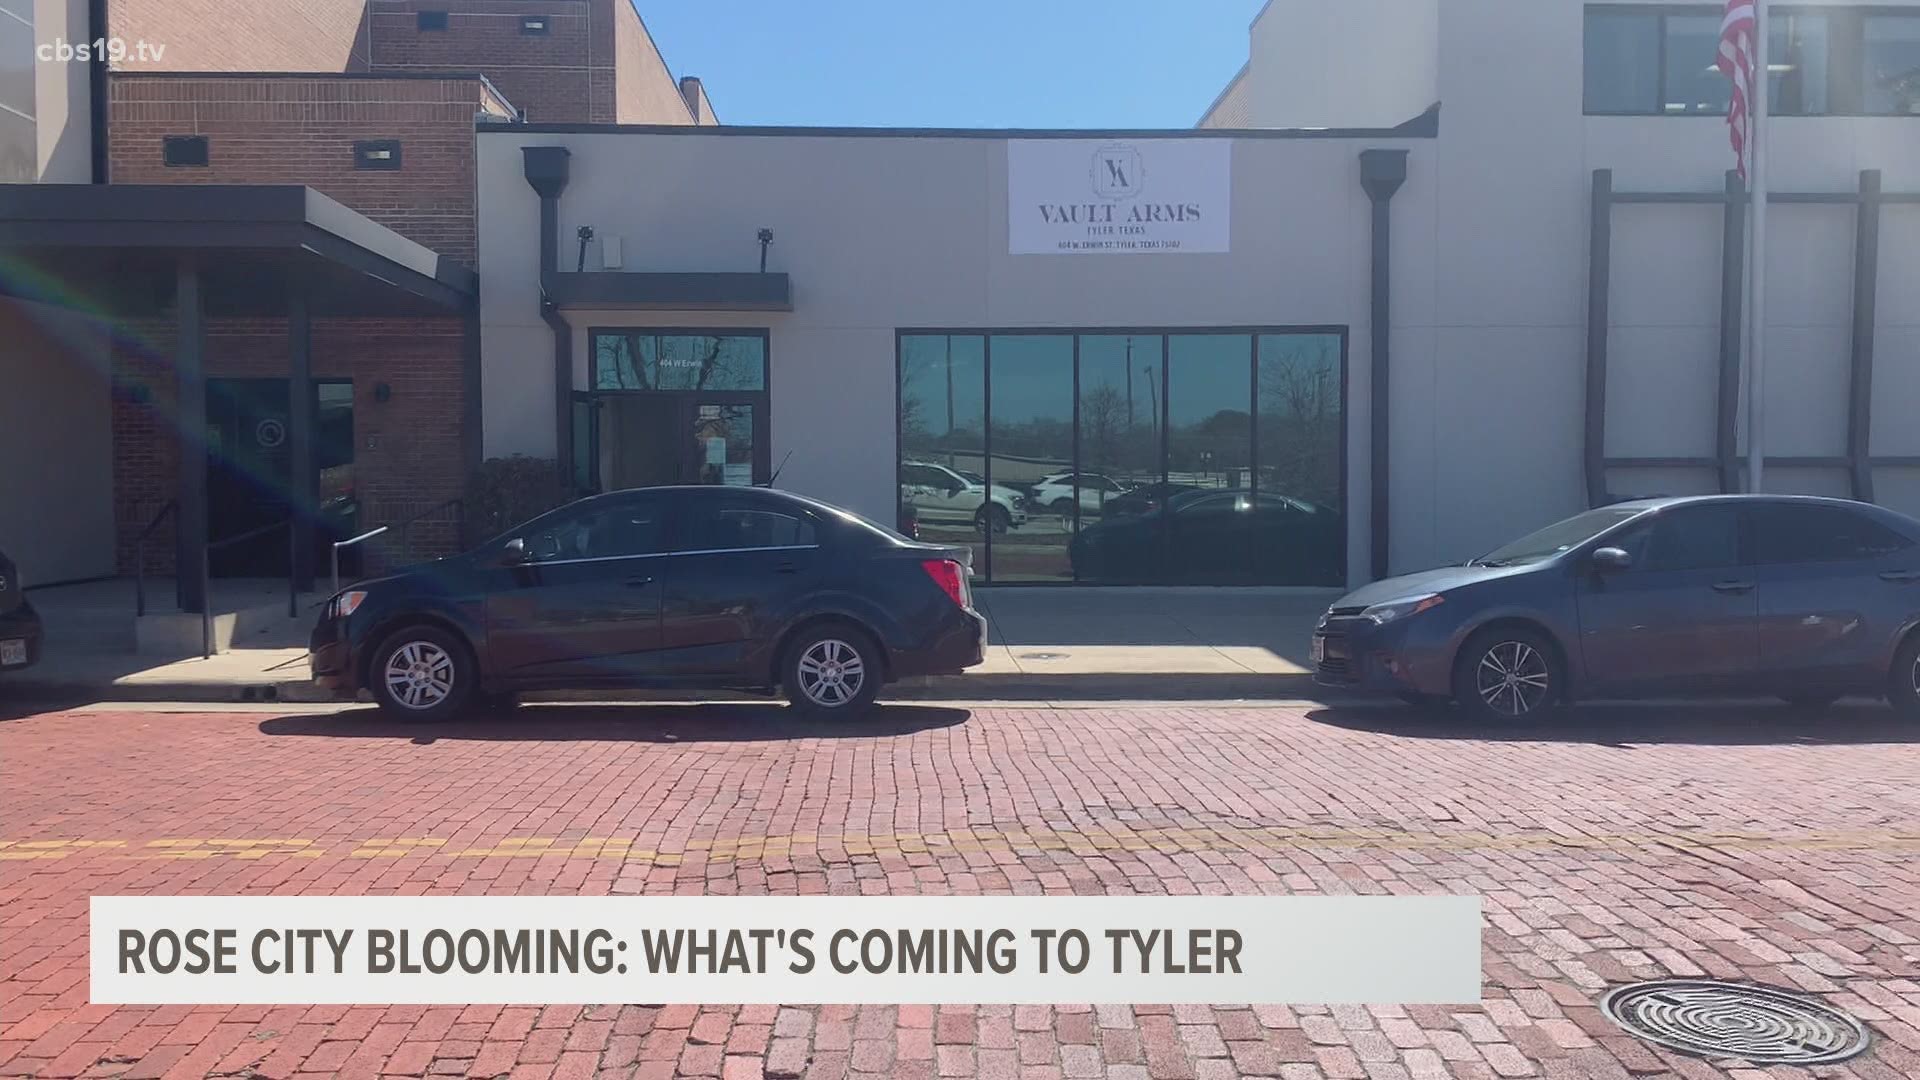 We're only three months into 2021, but already the City of Tyler has issued several permits for new businesses.